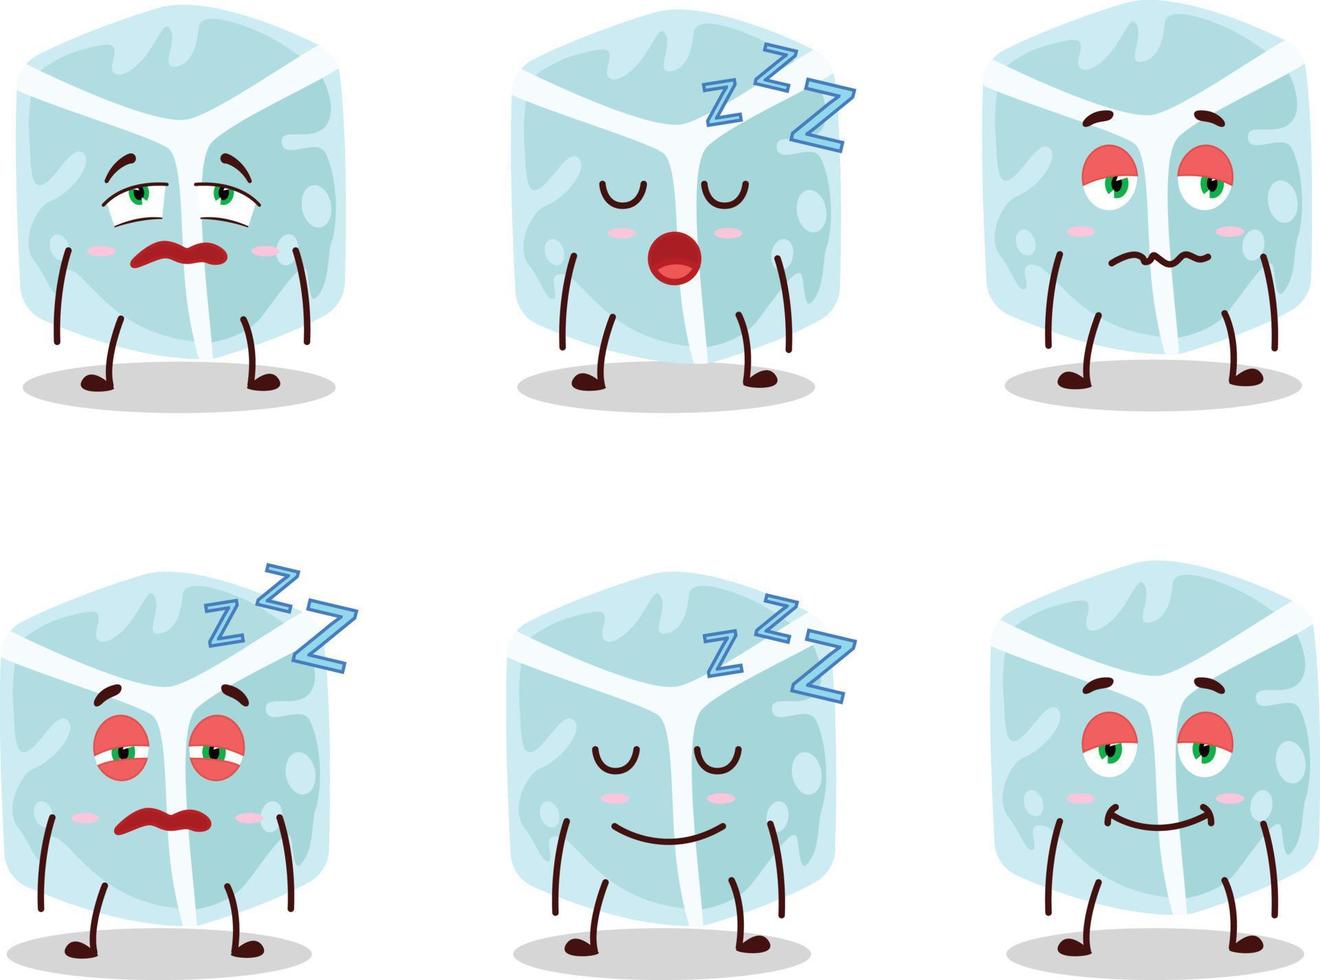 Cartoon character of ice tube with sleepy expression vector